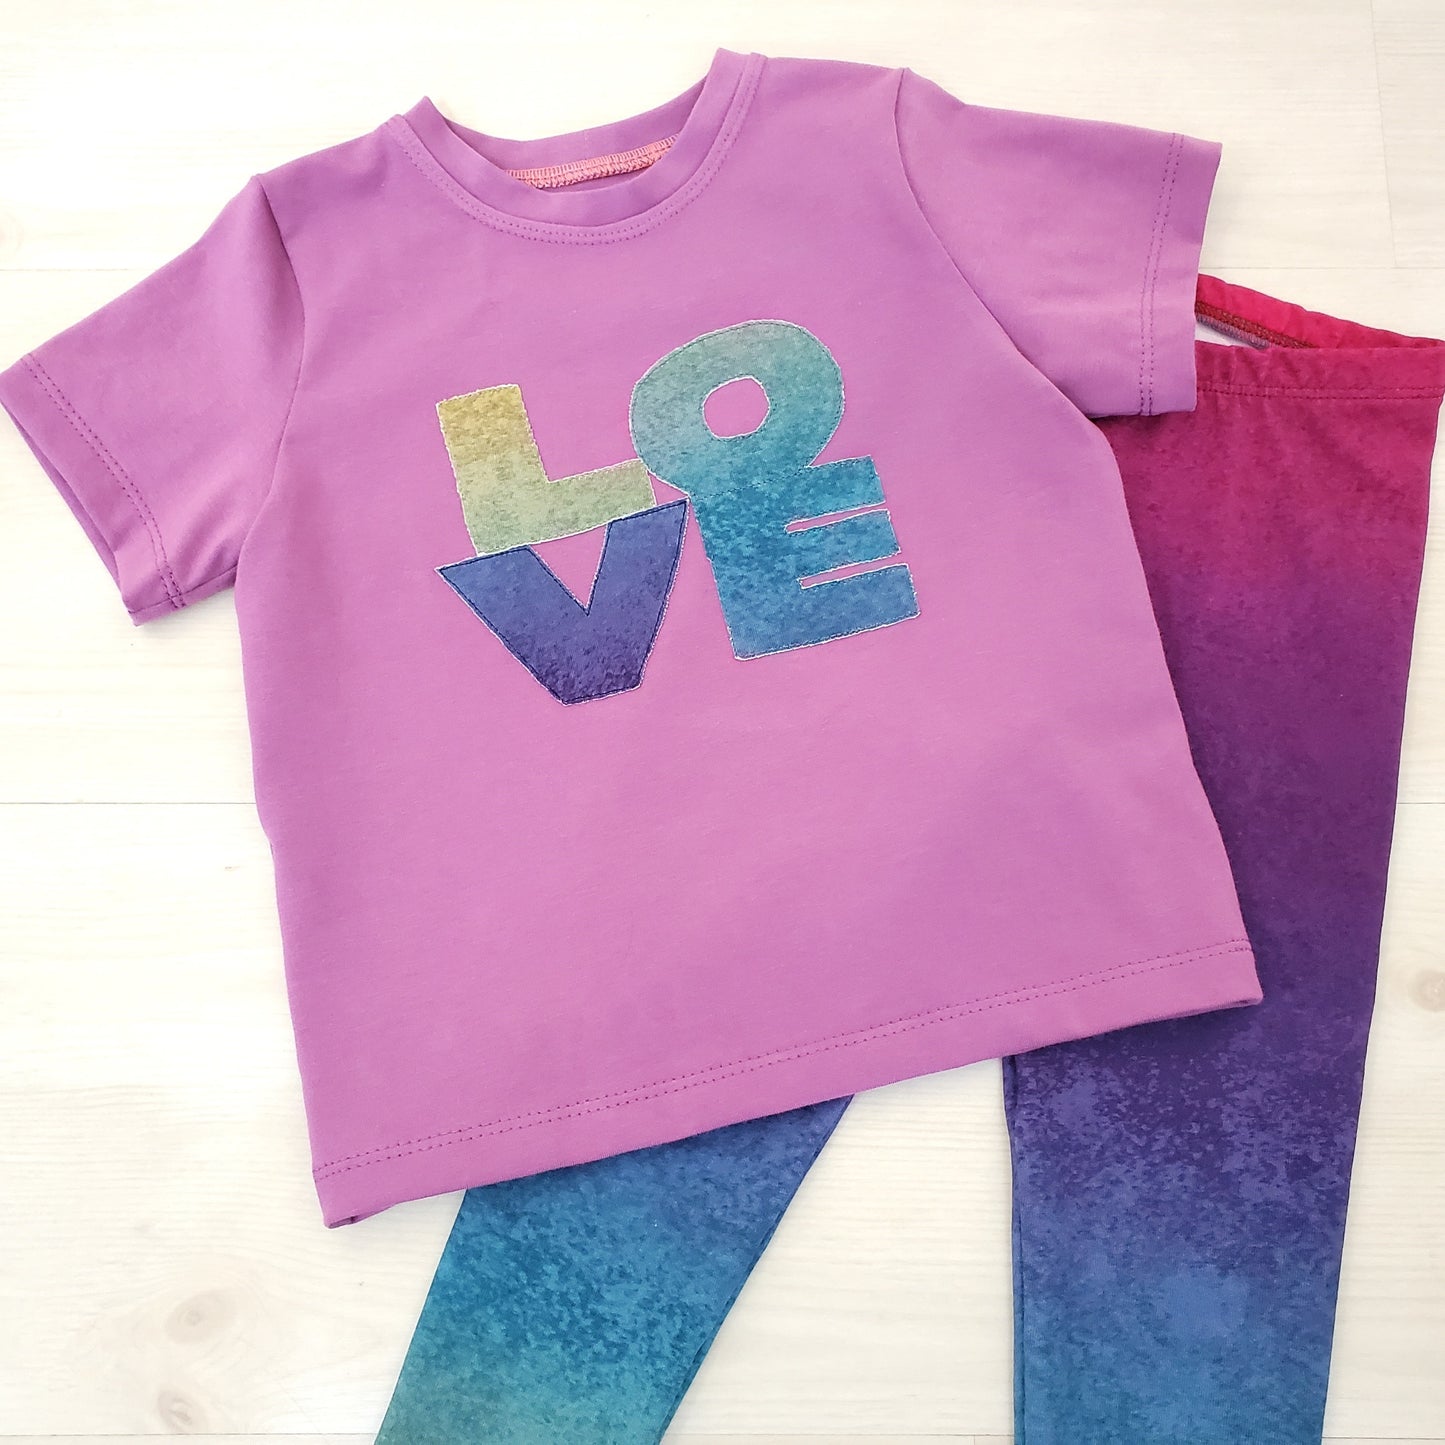 Rainbow Clothing Sets for Kids